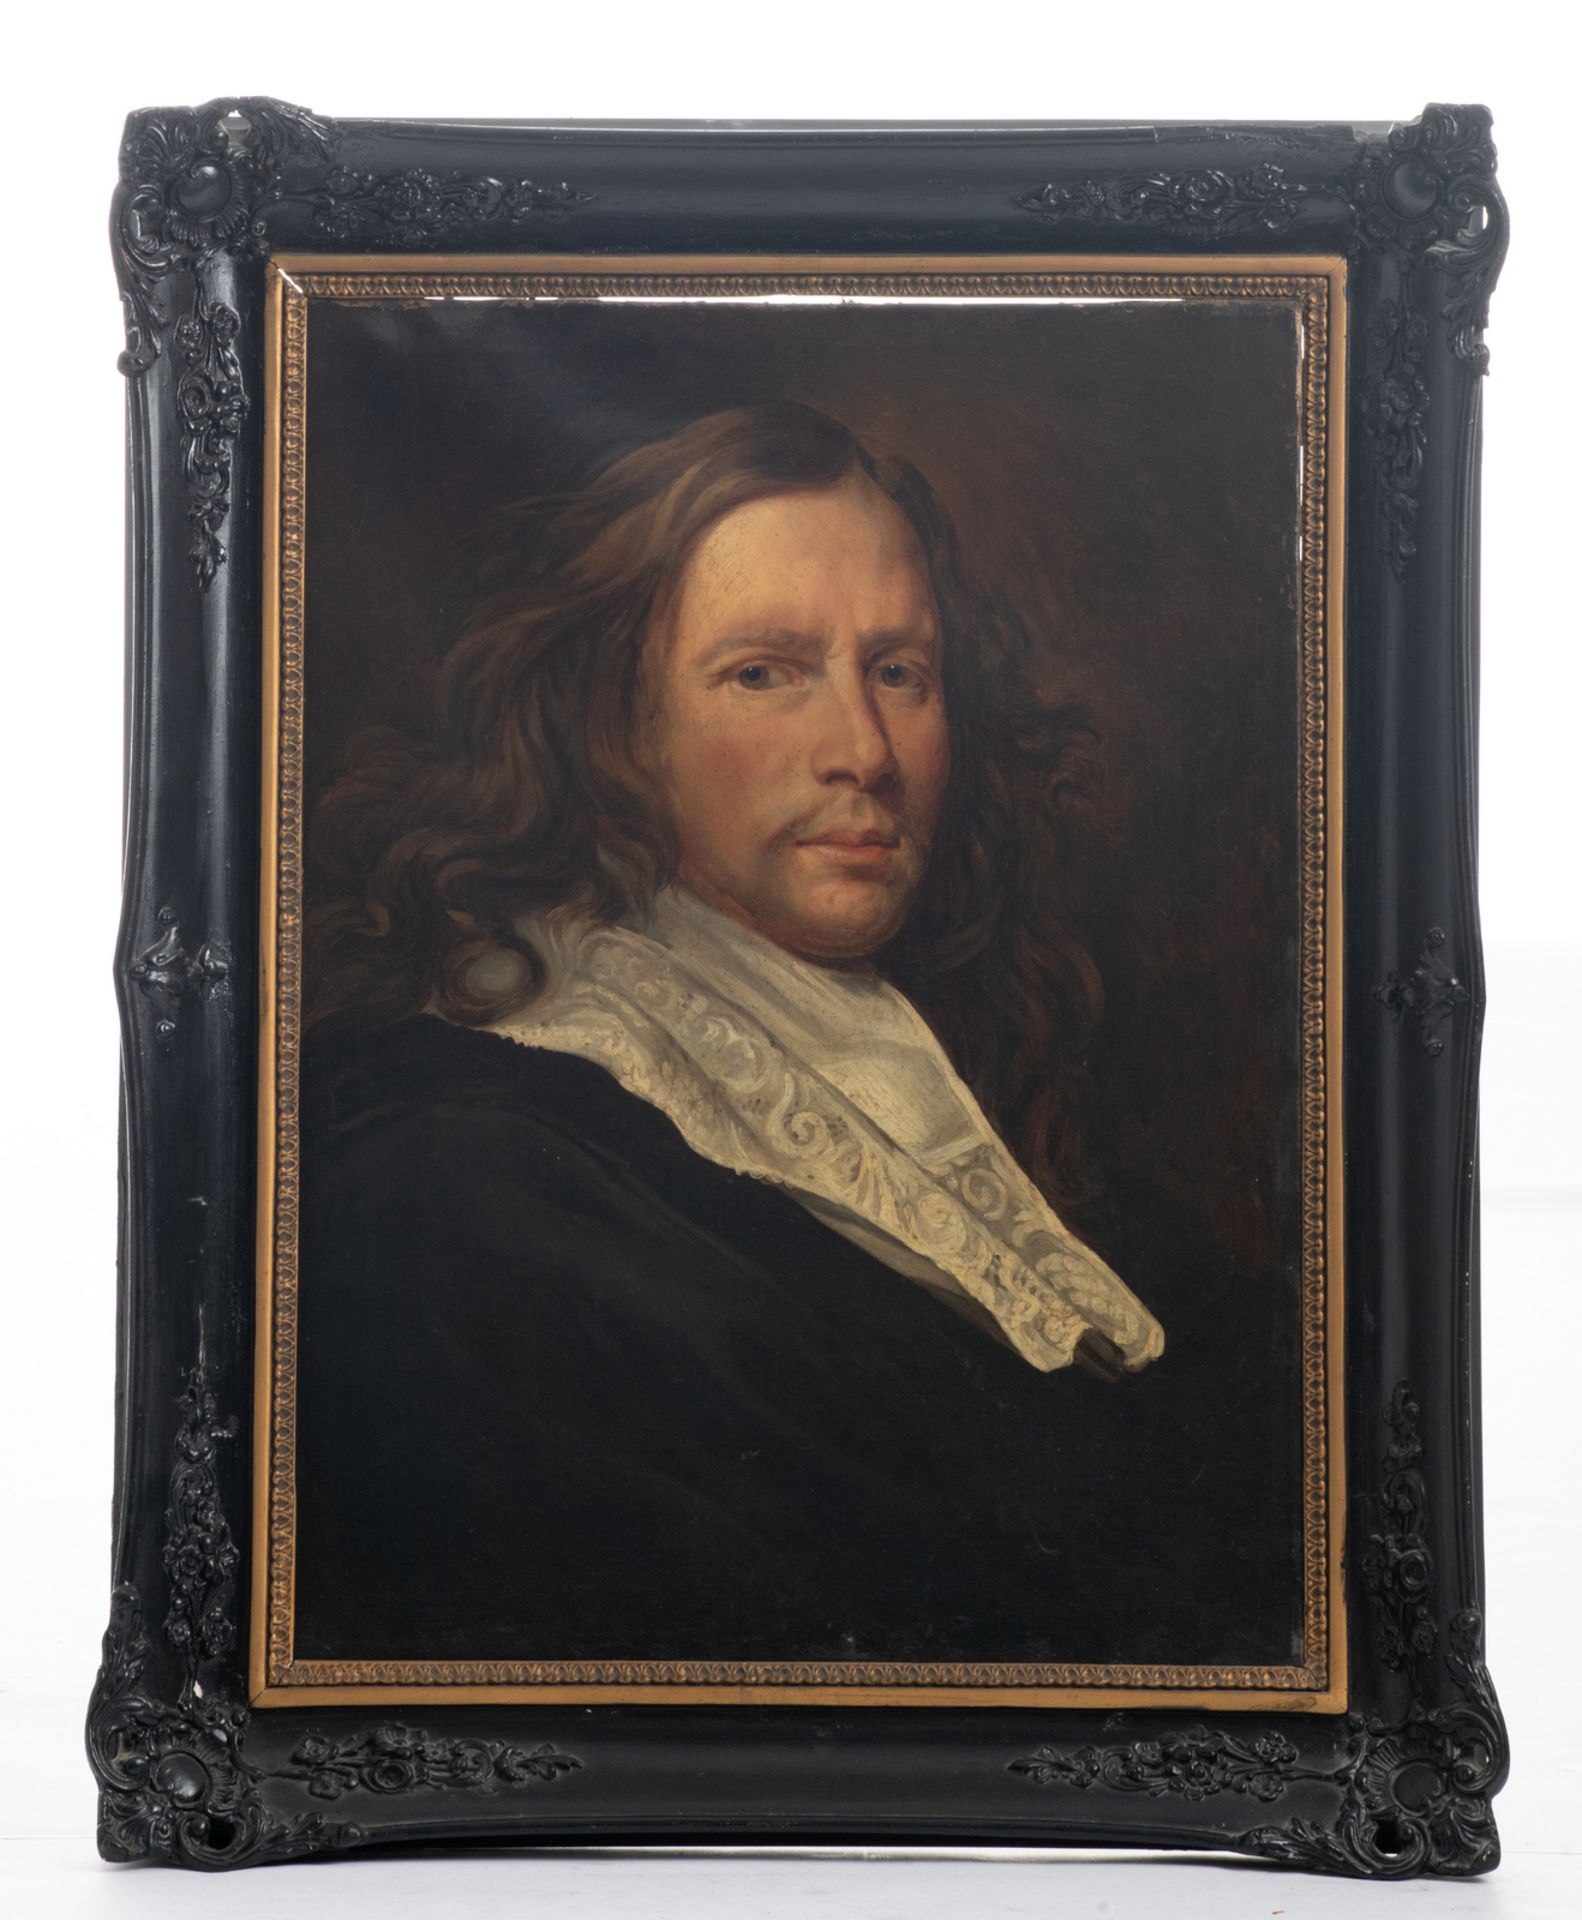 Unsigned, a portrait of a man in the 17thC manner, oil on canvas, 19thC, ex. Auction Van Dyck - - Image 2 of 3